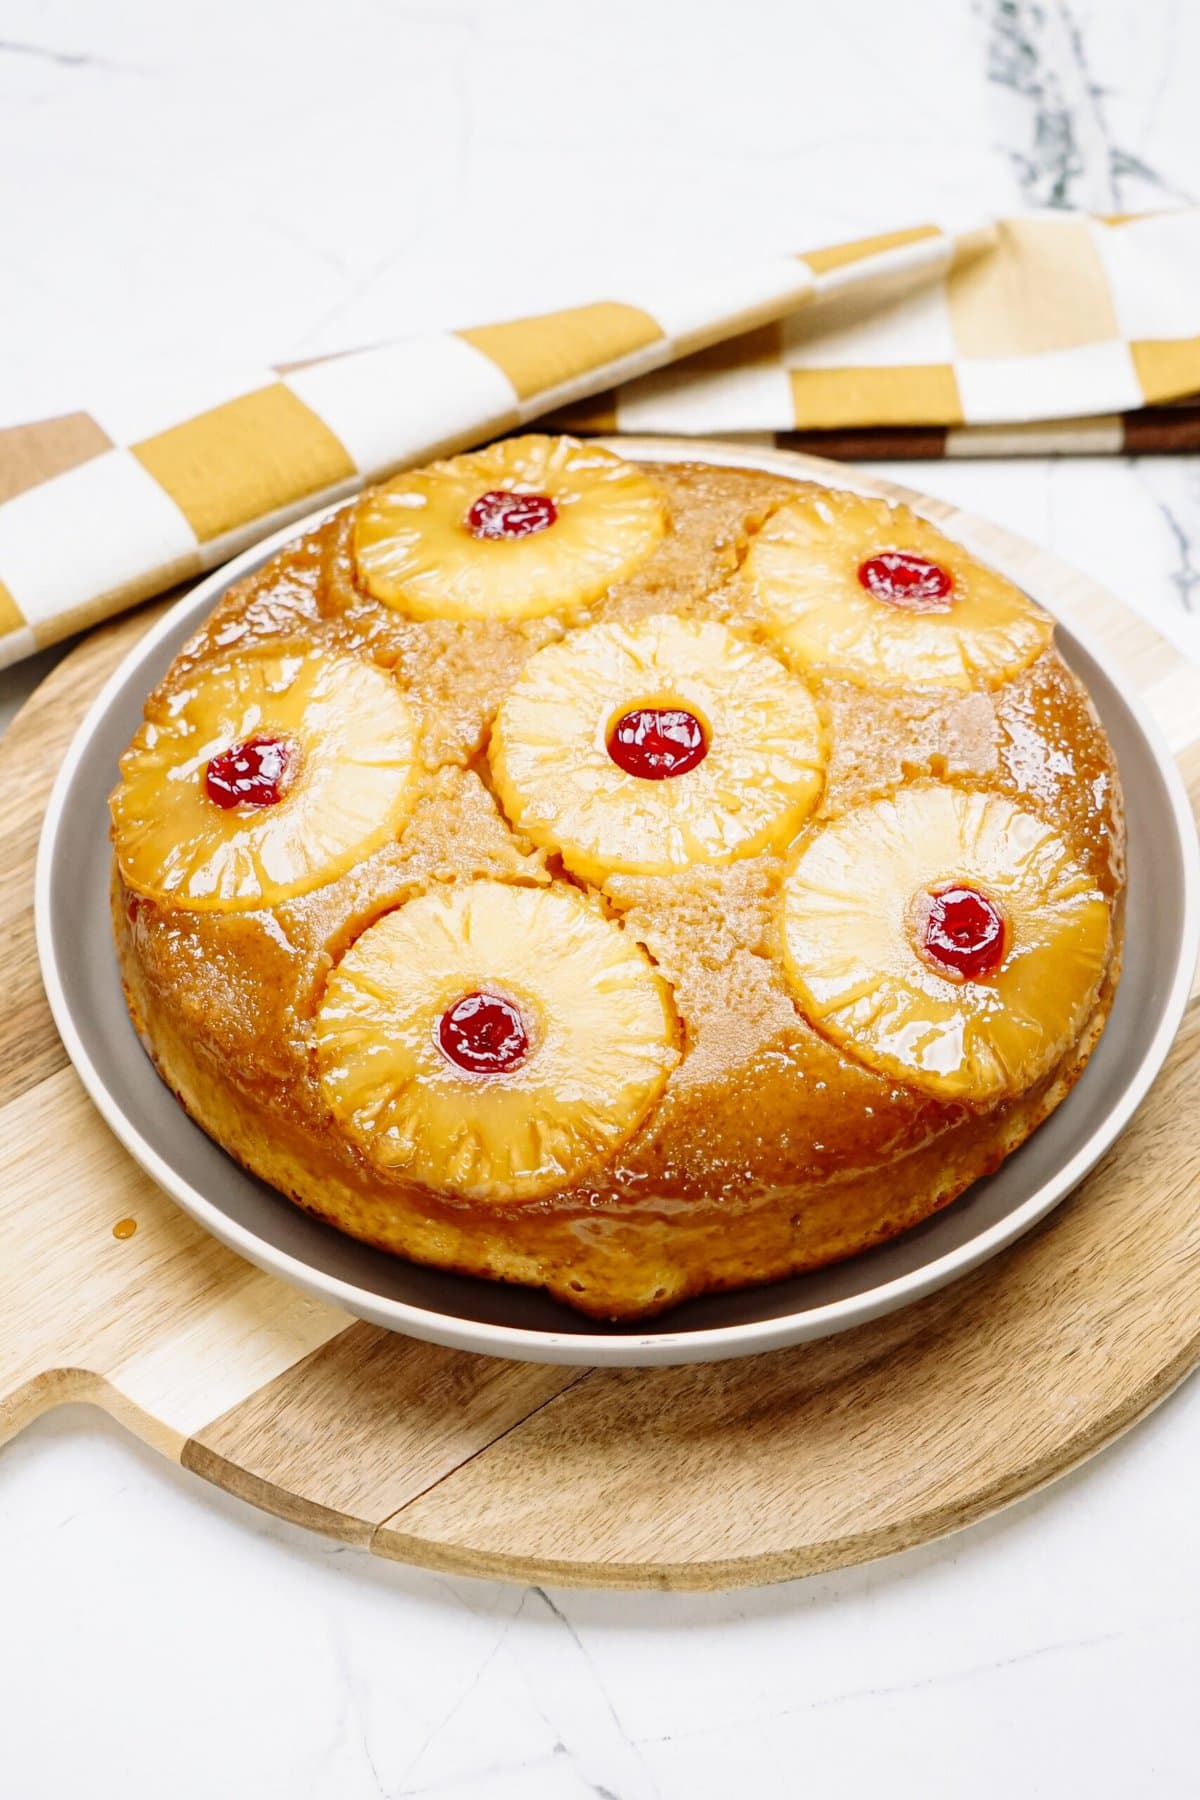 Homemade pineapple upside-down cake on a plate, garnished with cherries and displayed on a wooden serving board.